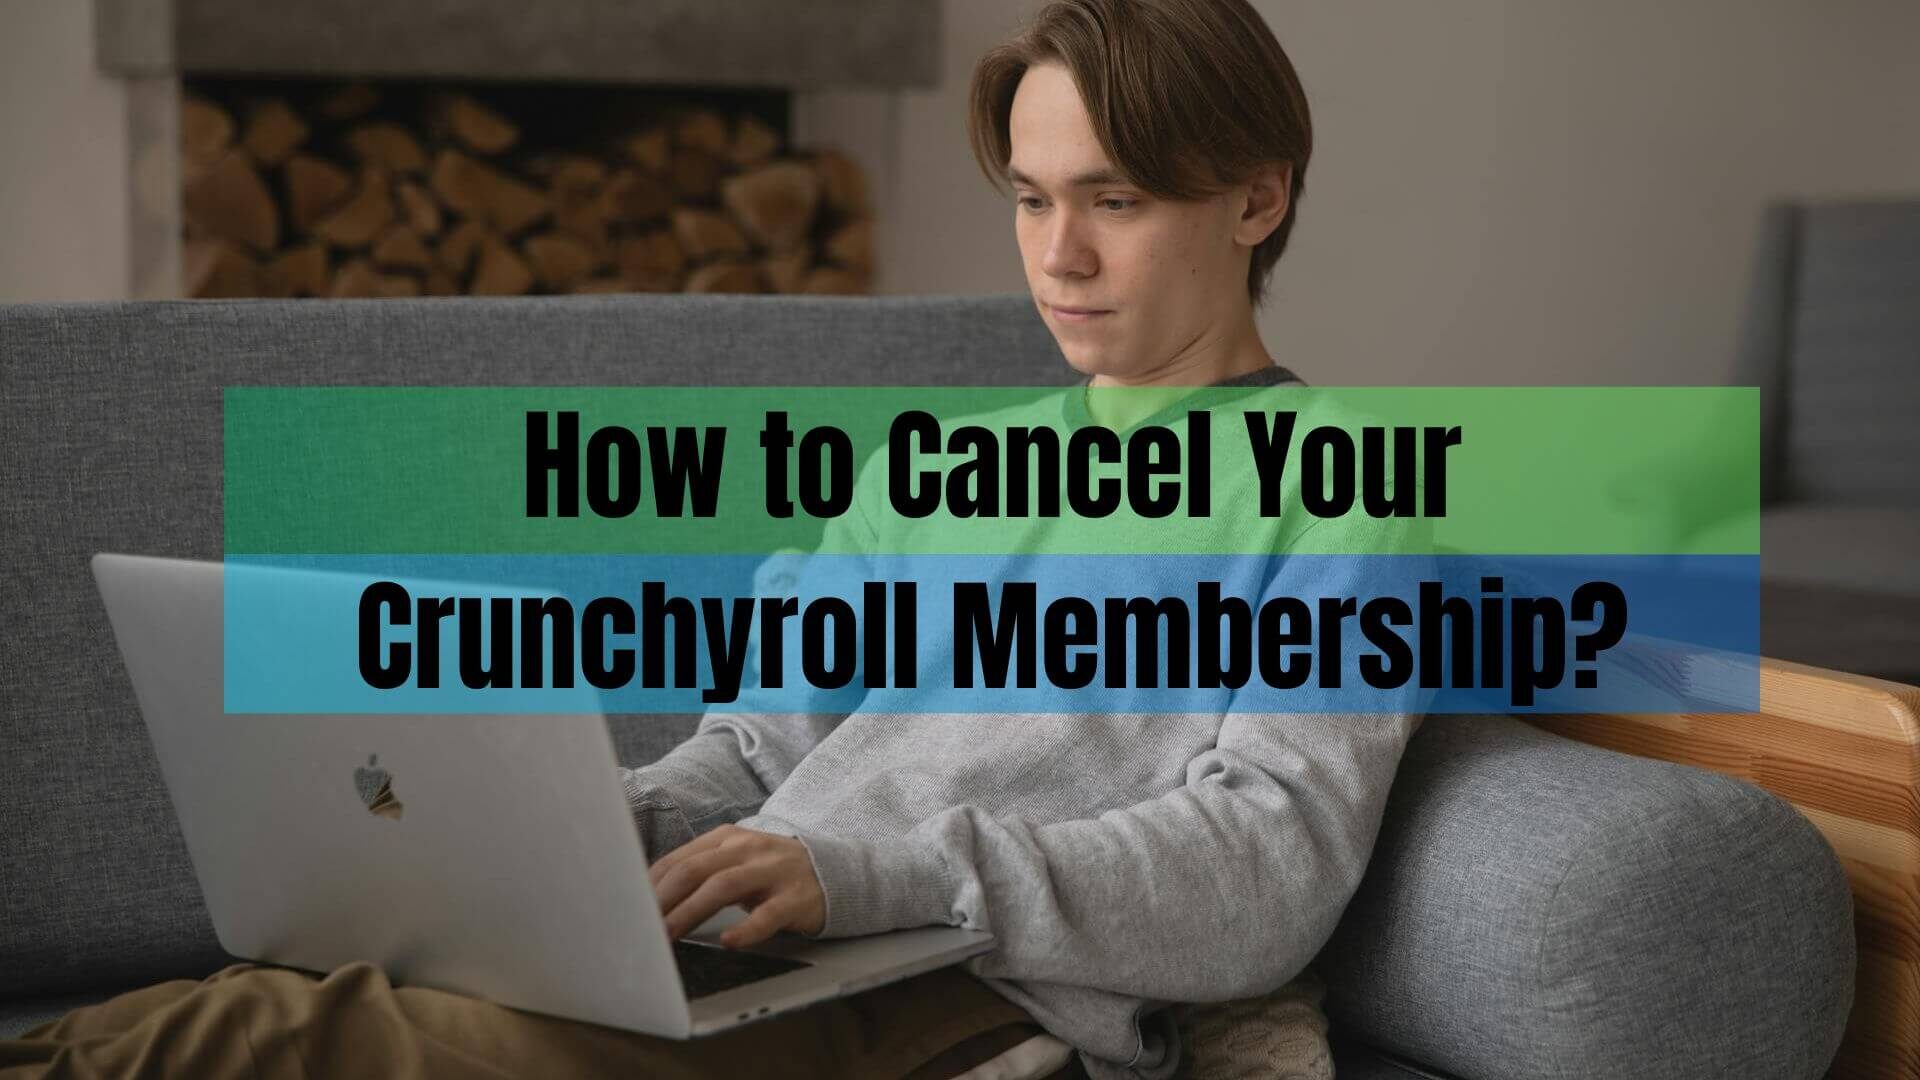 Struggling to cancel your Crunchyroll membership? Click here to discover the step-by-step guidance to end your subscription stress-free.